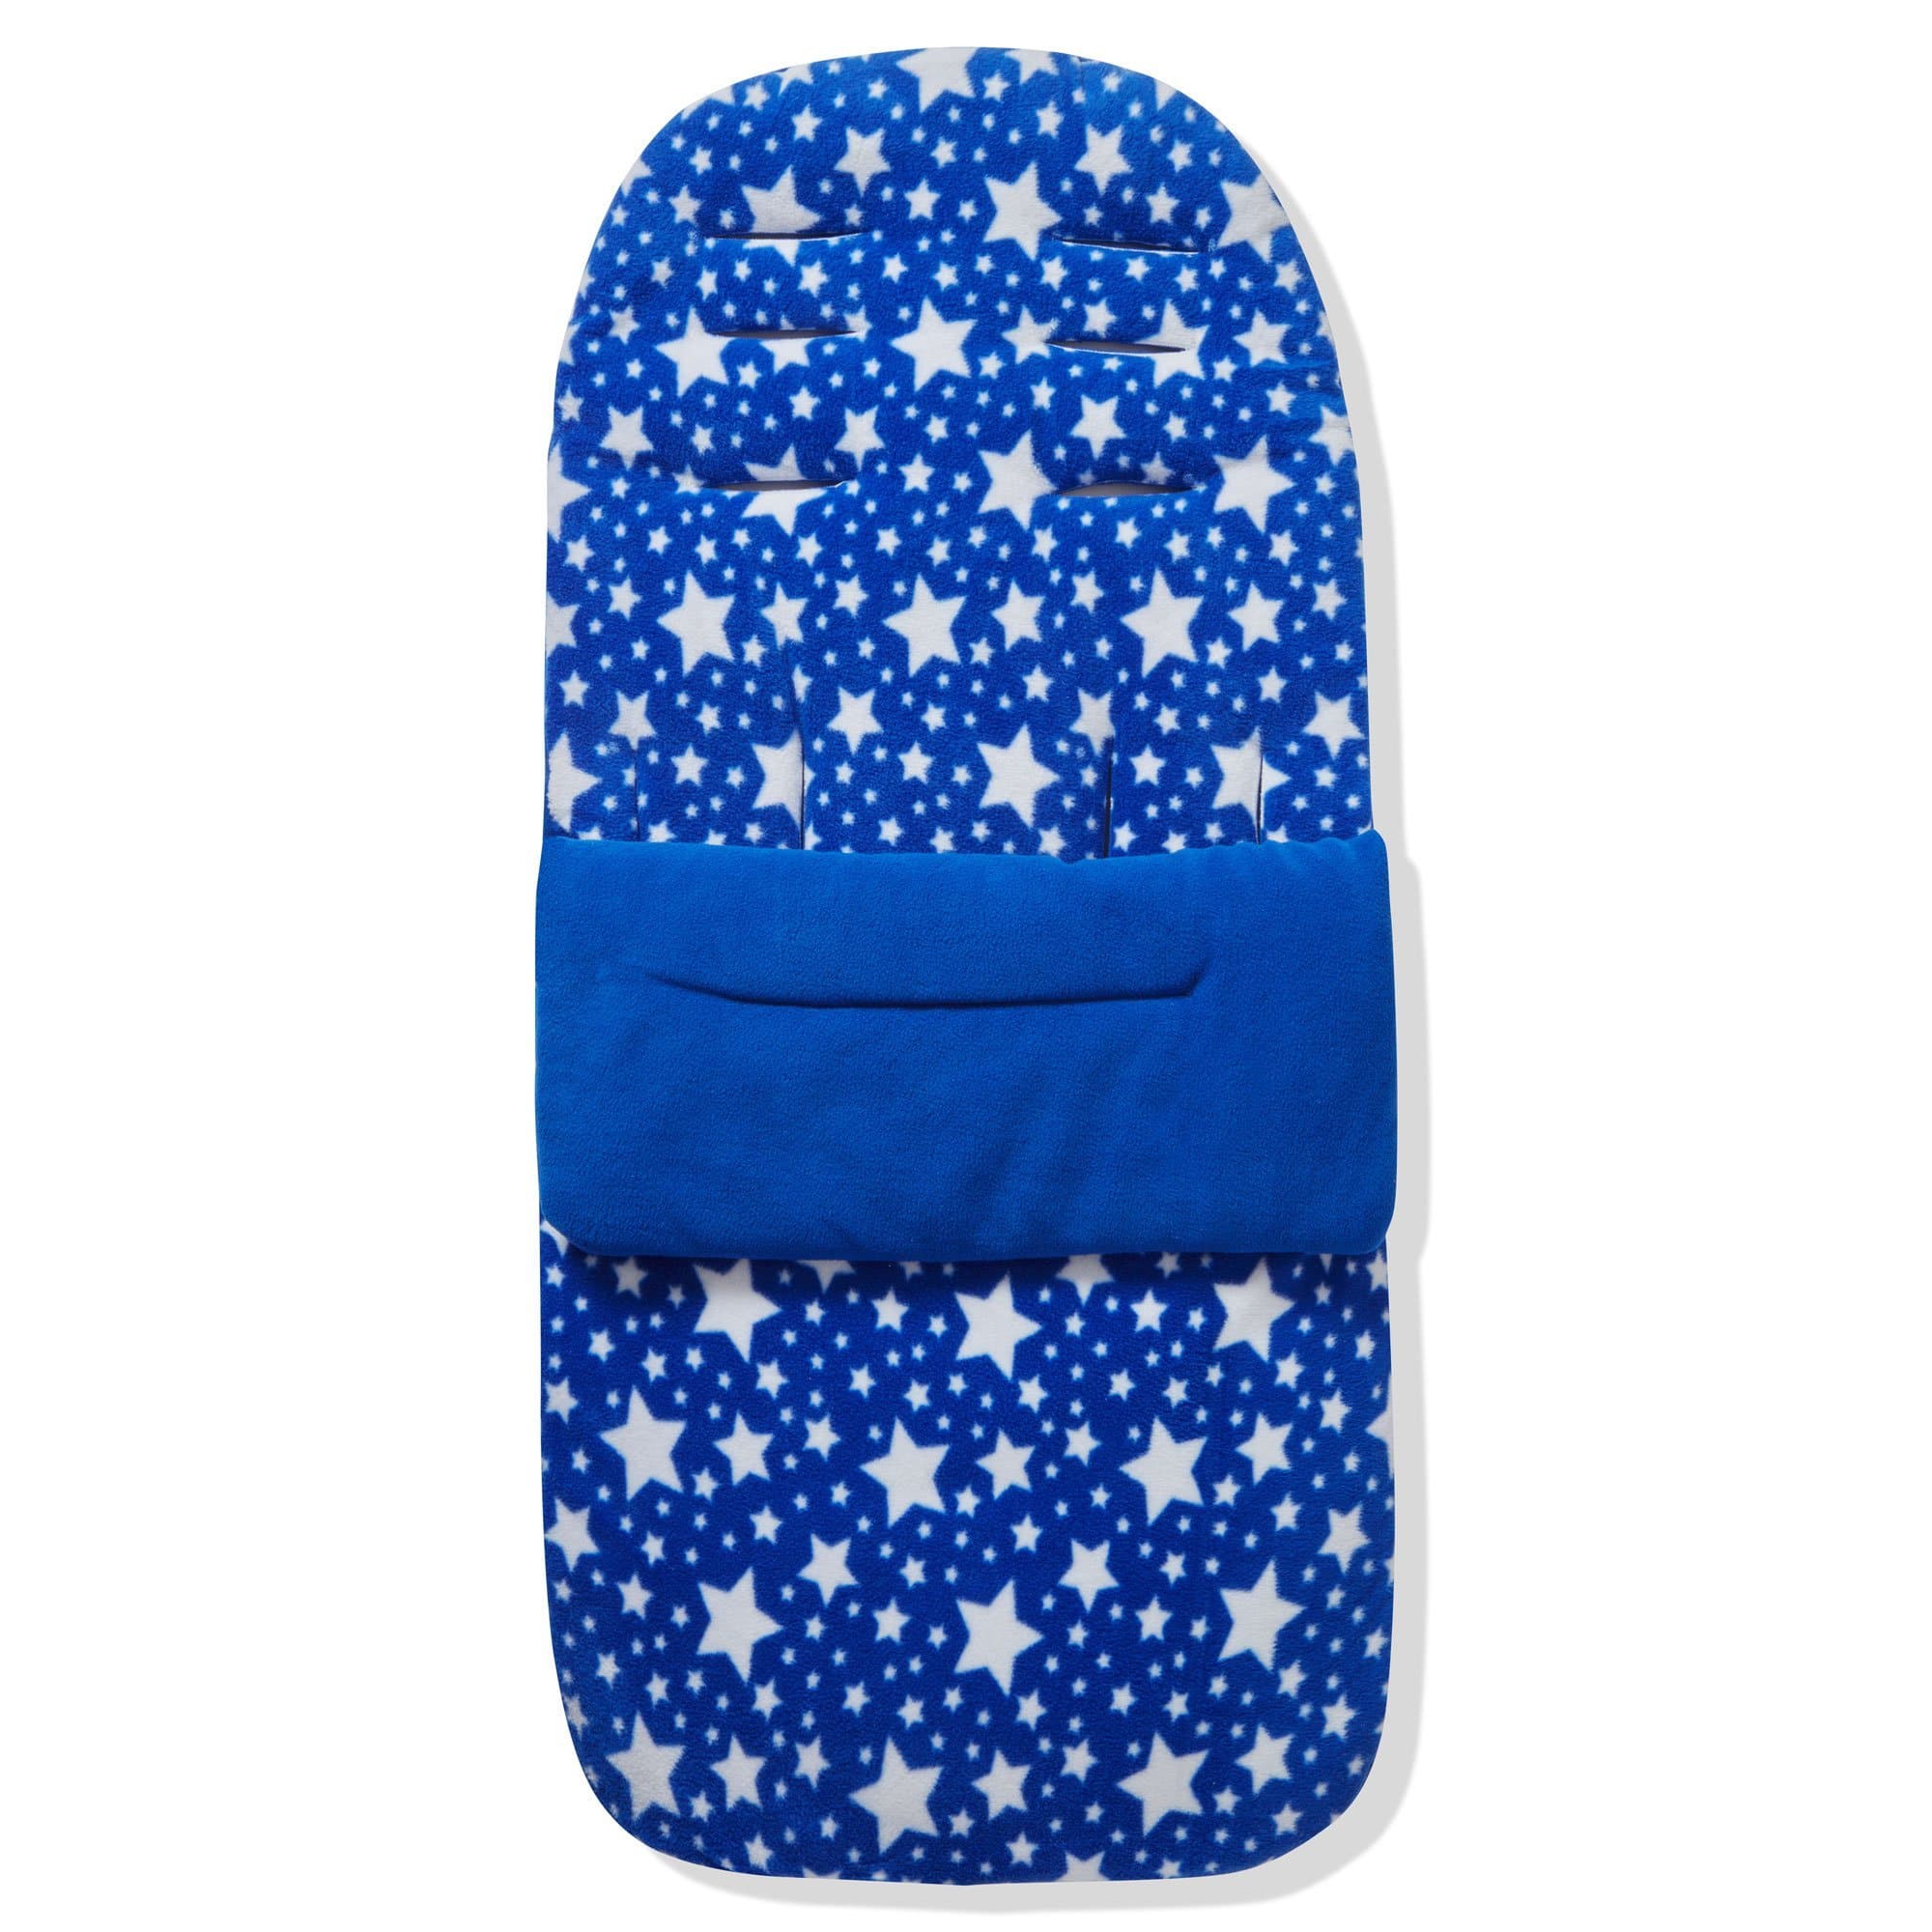 Fleece Footmuff / Cosy Toes Compatible with Mutsy - Blue Star / Fits All Models | For Your Little One